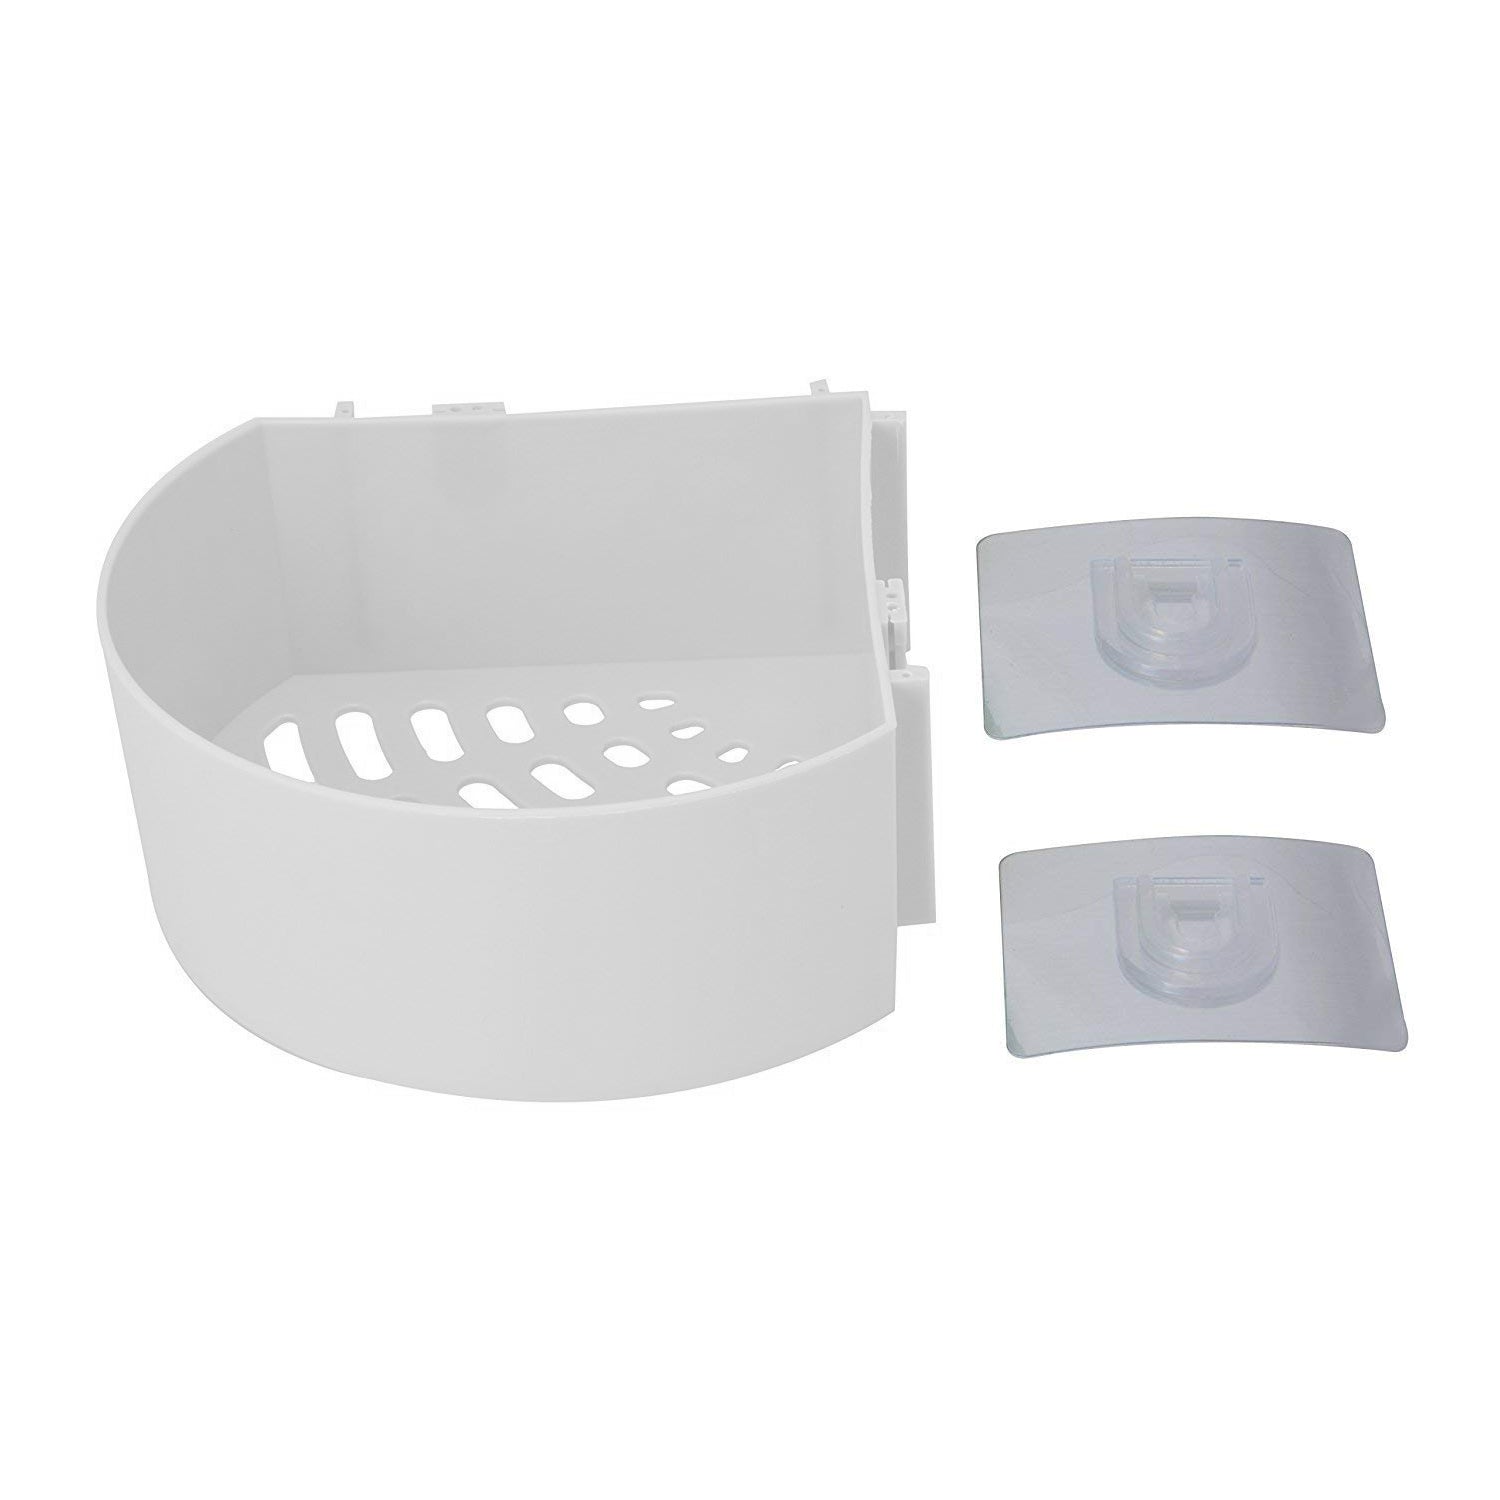 Kayfia Shower Caddy Basket Shelf with Soap Holder, 3 Pack Adhesive